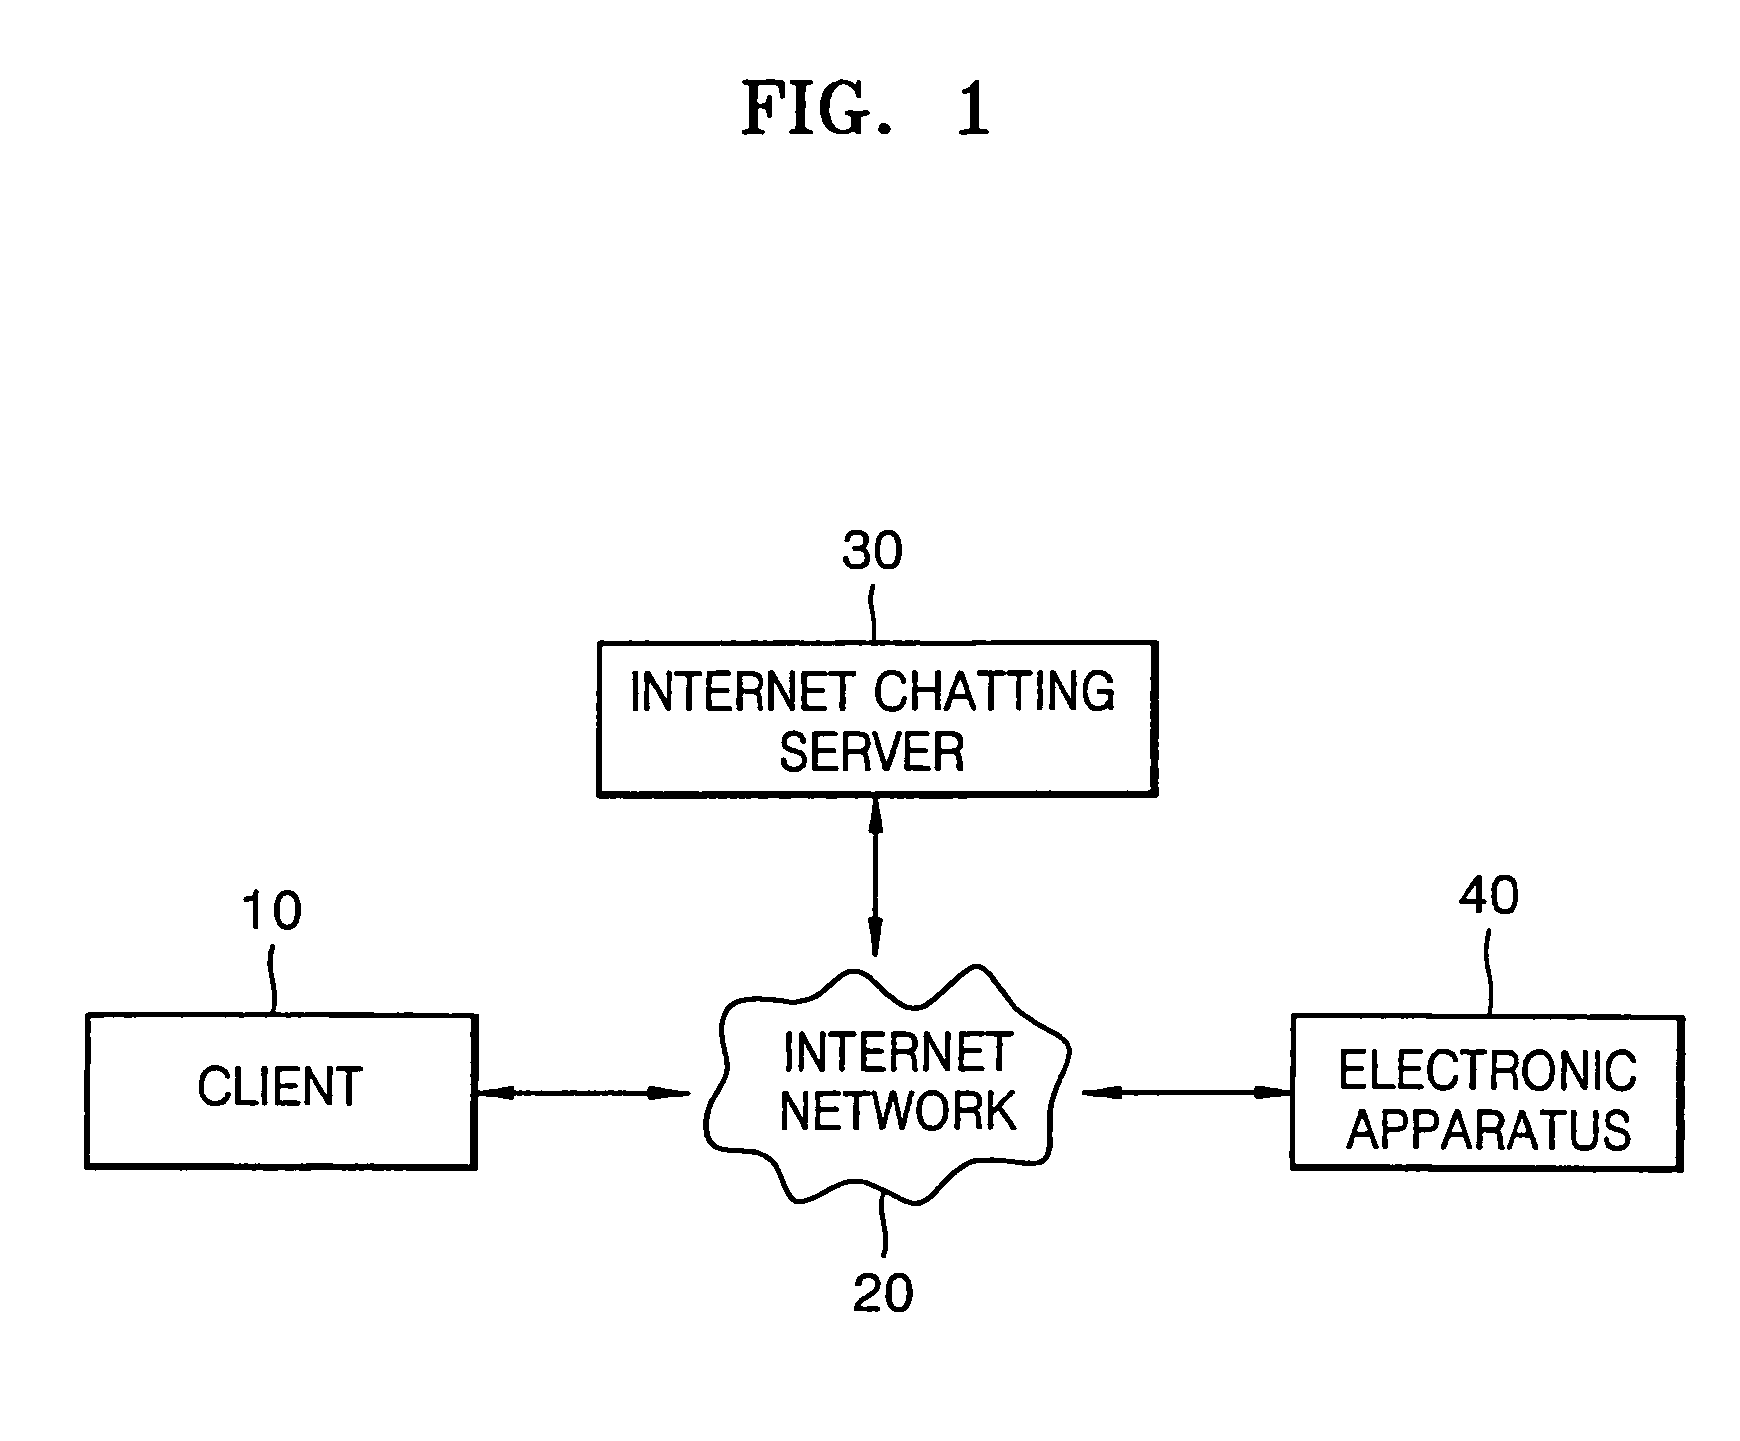 Method and apparatus to remotely control electronic apparatuses over a network